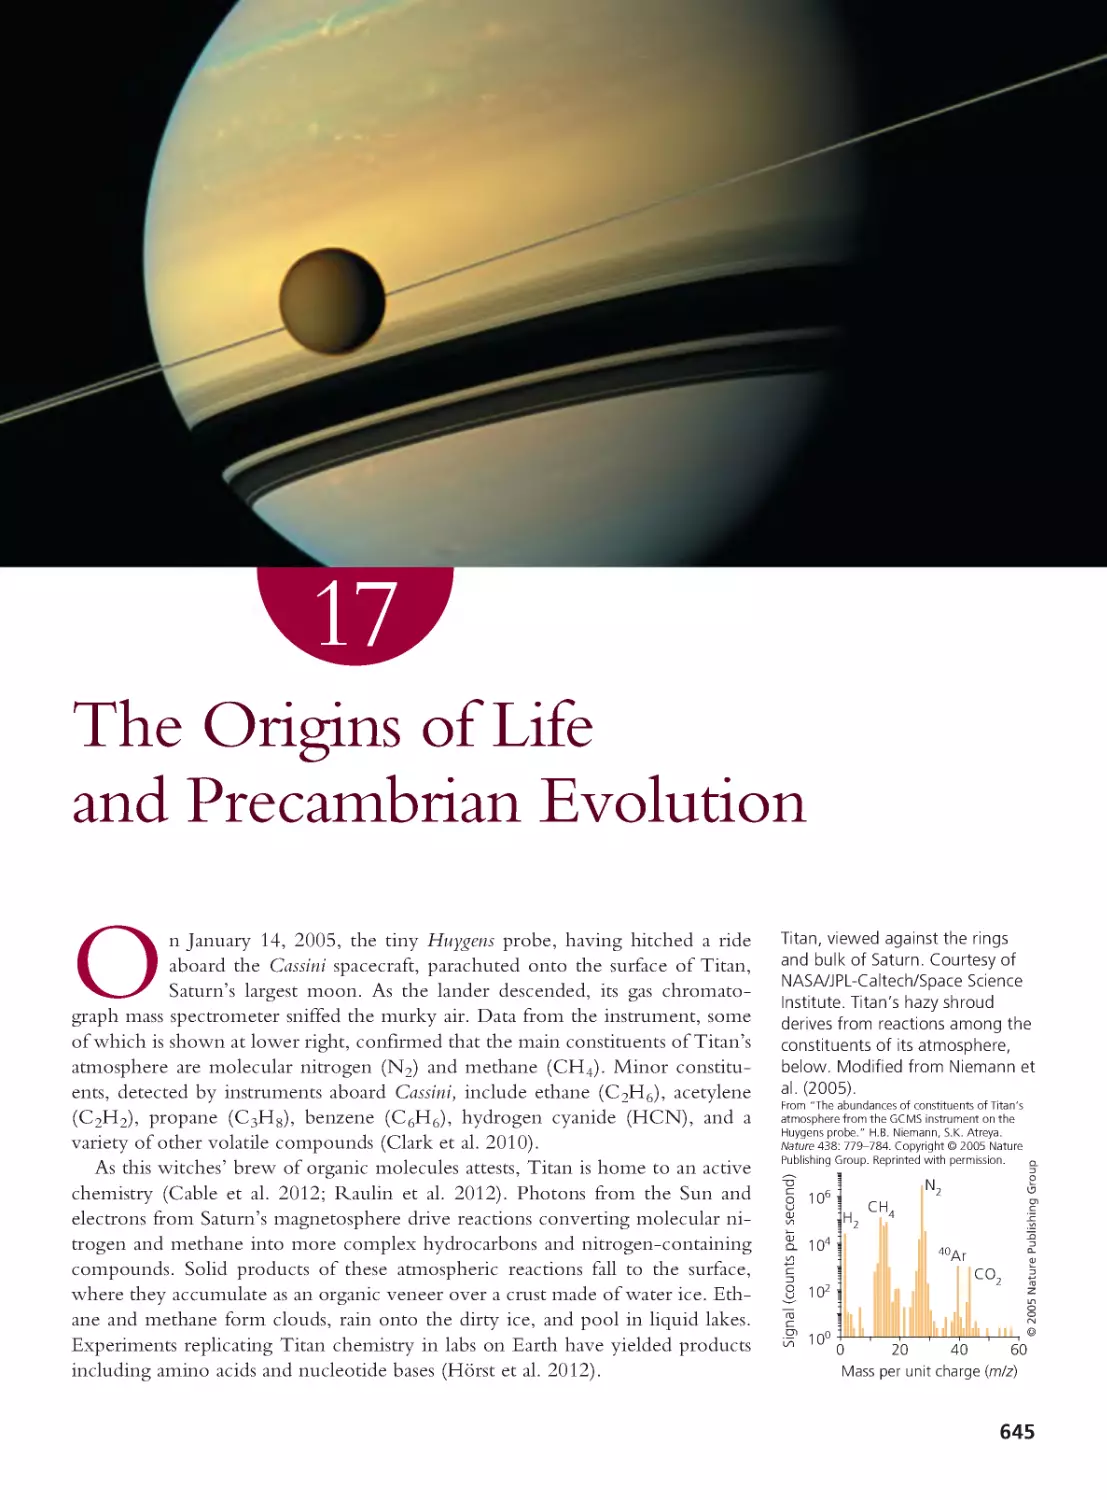 CHAPTER 17 The Origins of Life and Precambrian Evolution